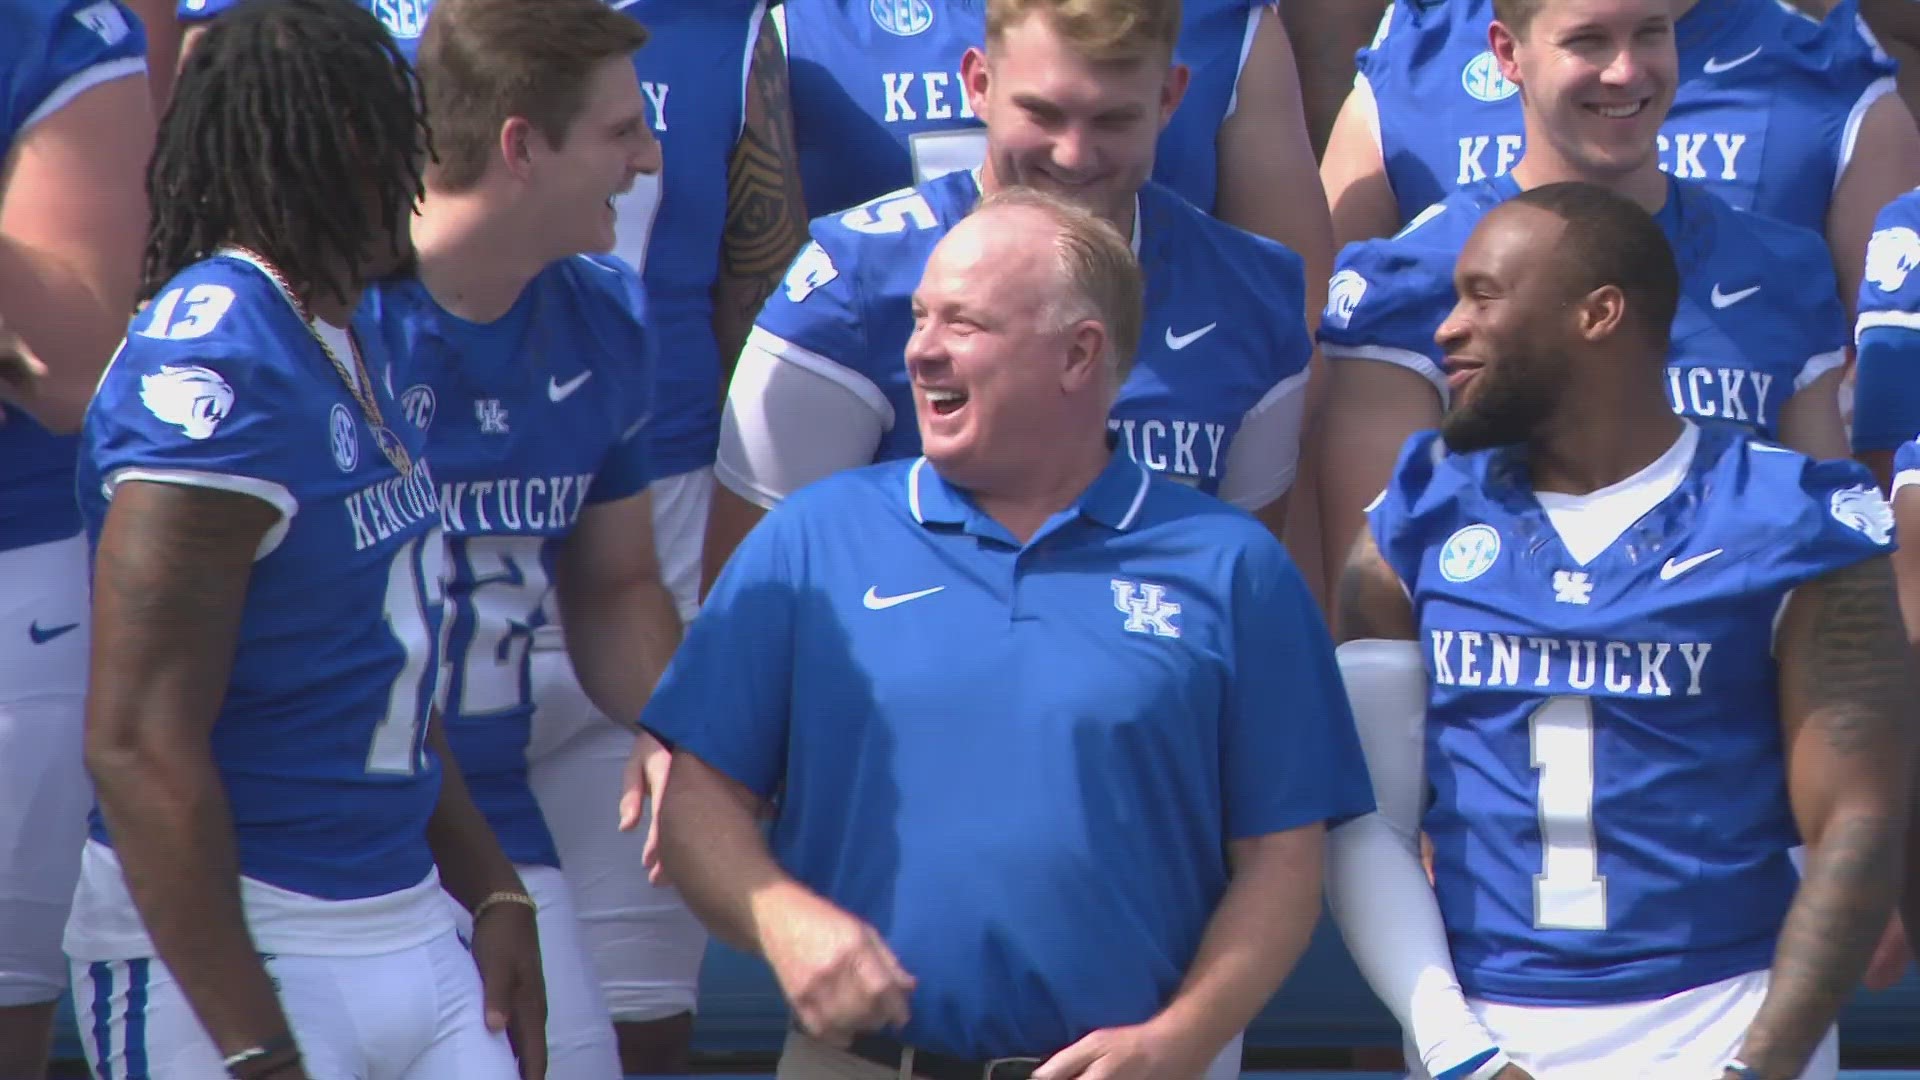 Mark Stoops says with NIL and the transfer portal, you have to be willing to adapt and change or you'll be irrelevant in a hurry.